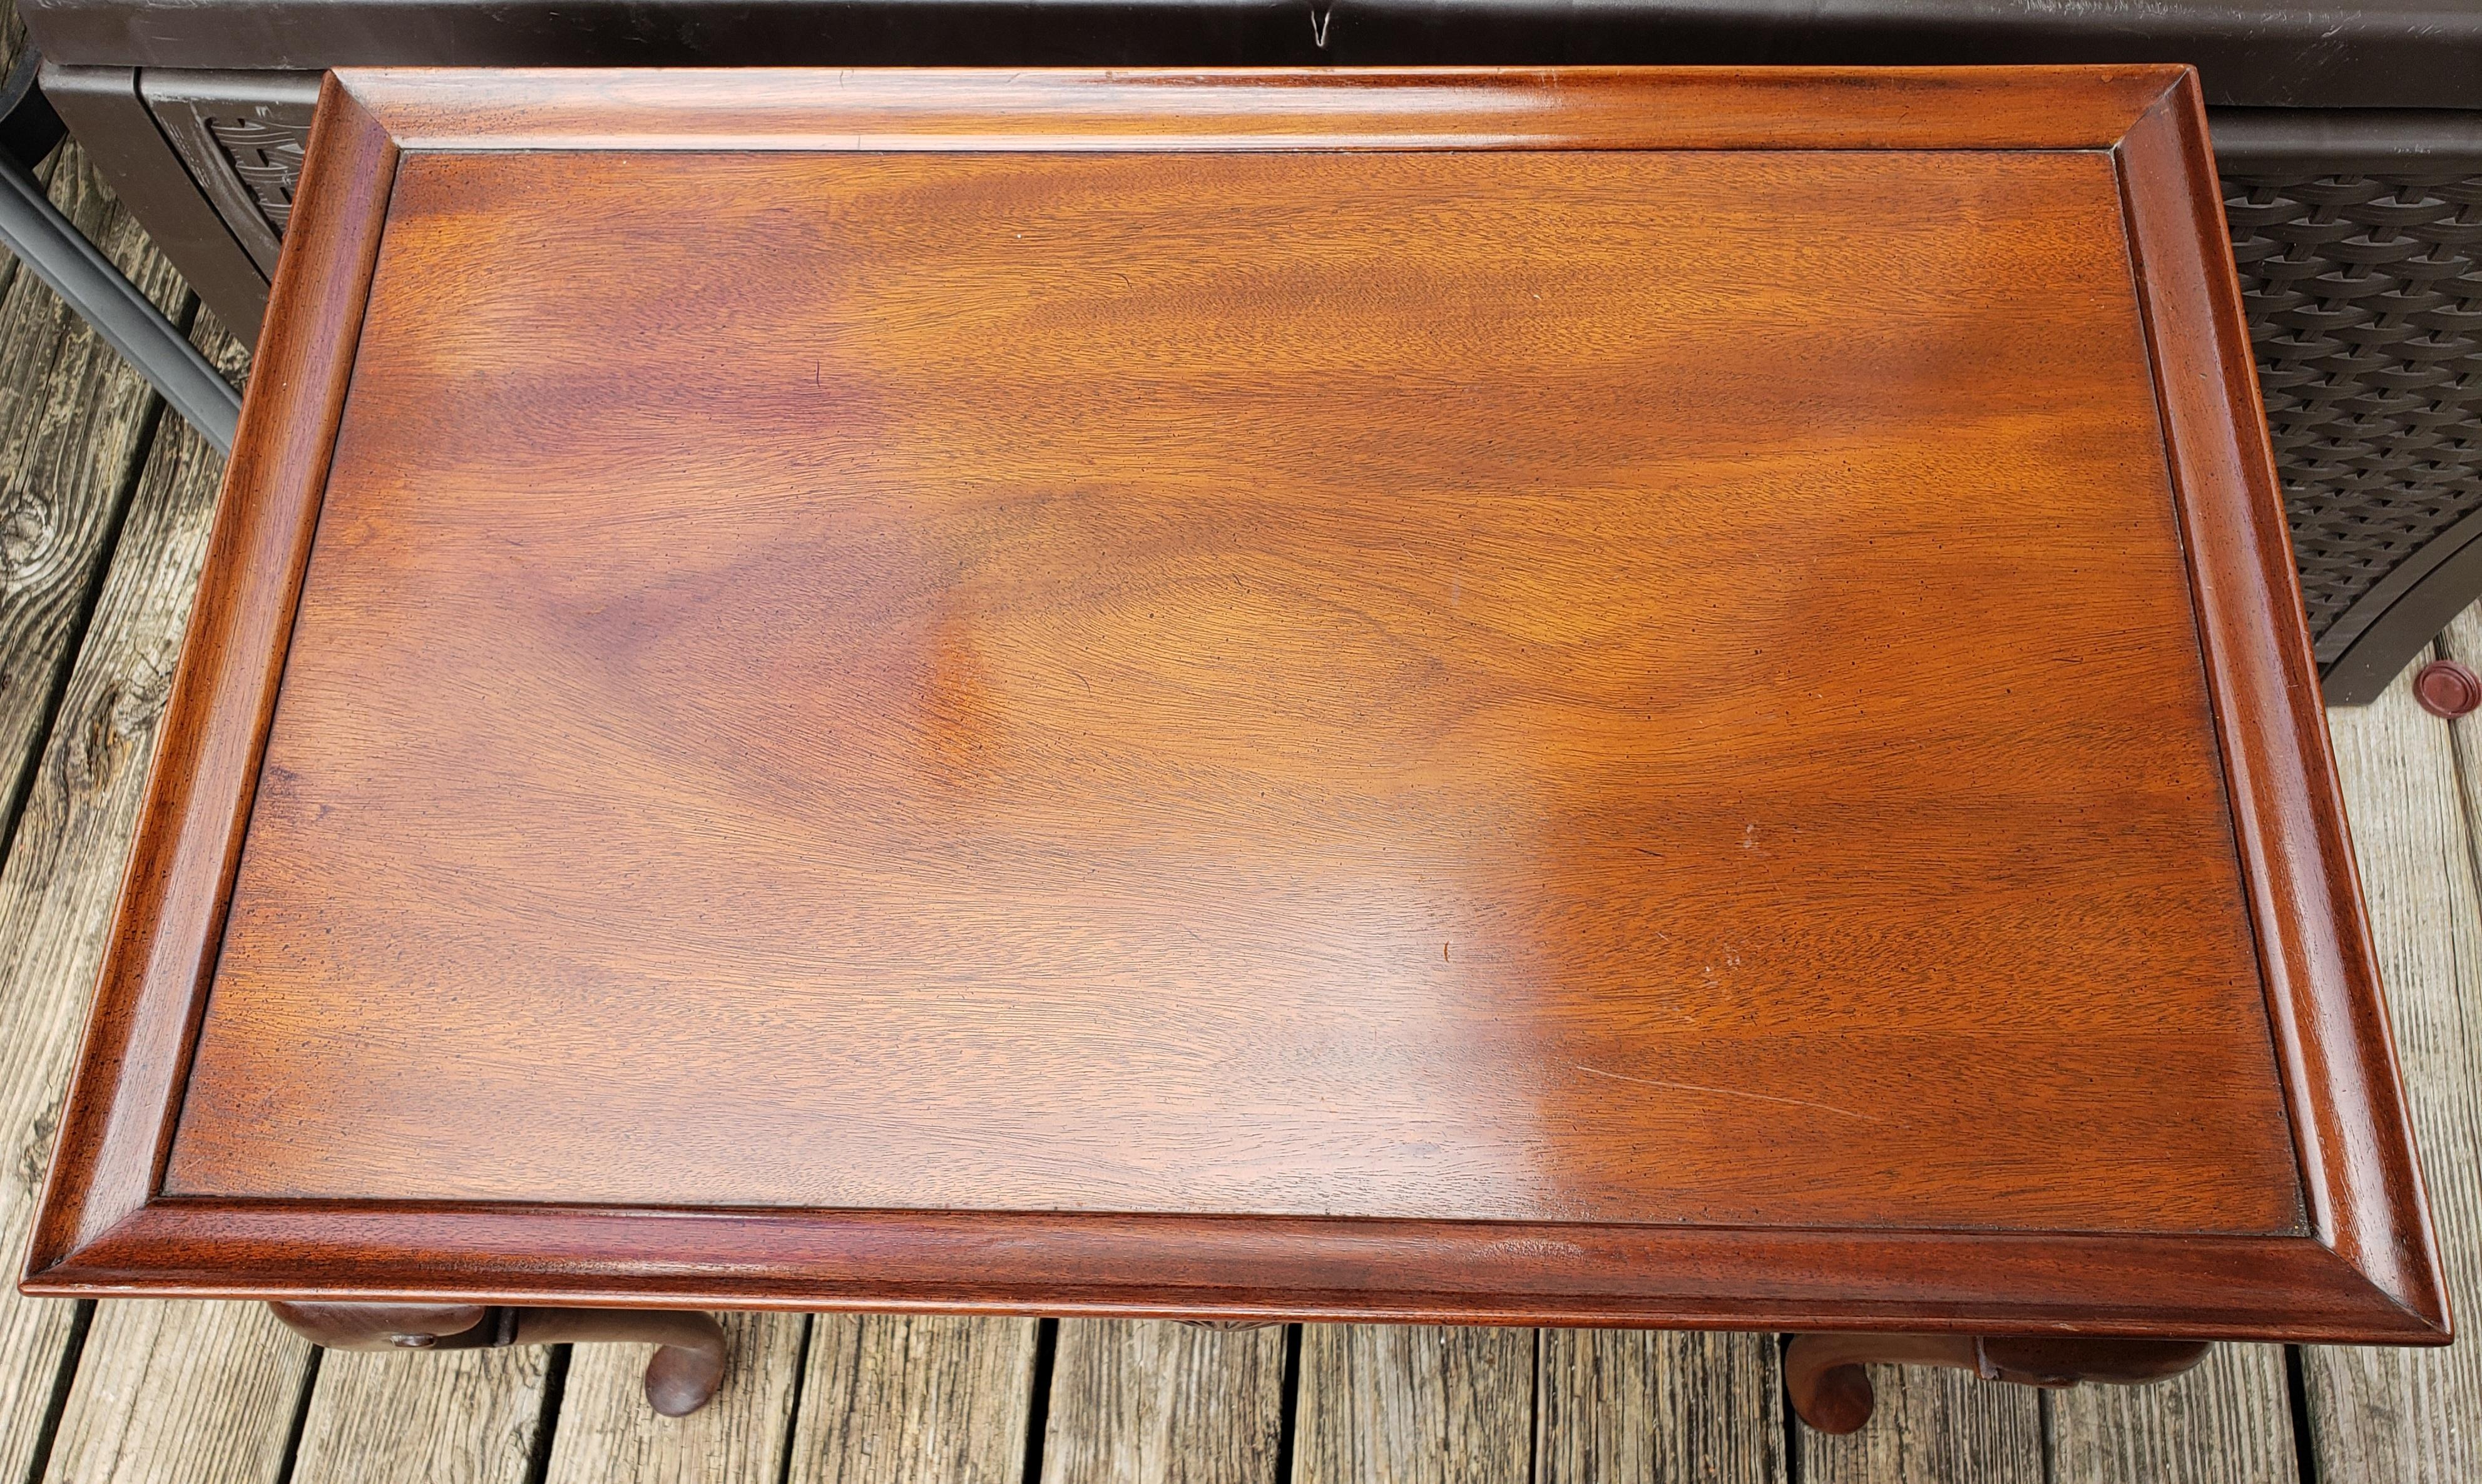 1950s English Mahogany Queen Anne Tray Top Tea Table by Hickory Chair Co. For Sale 4